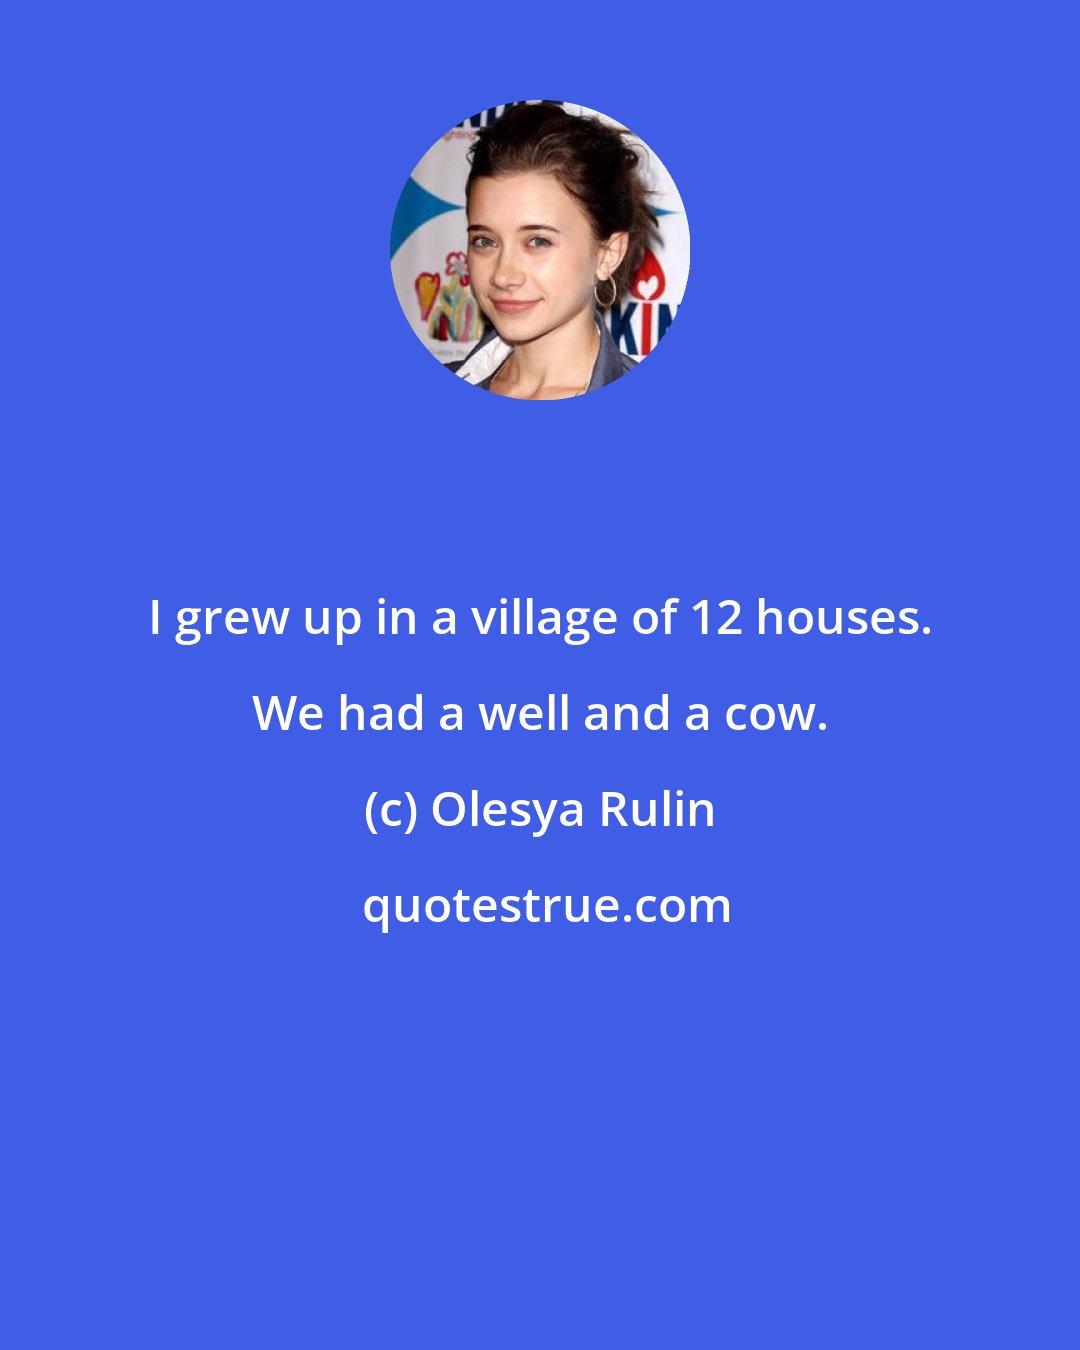 Olesya Rulin: I grew up in a village of 12 houses. We had a well and a cow.